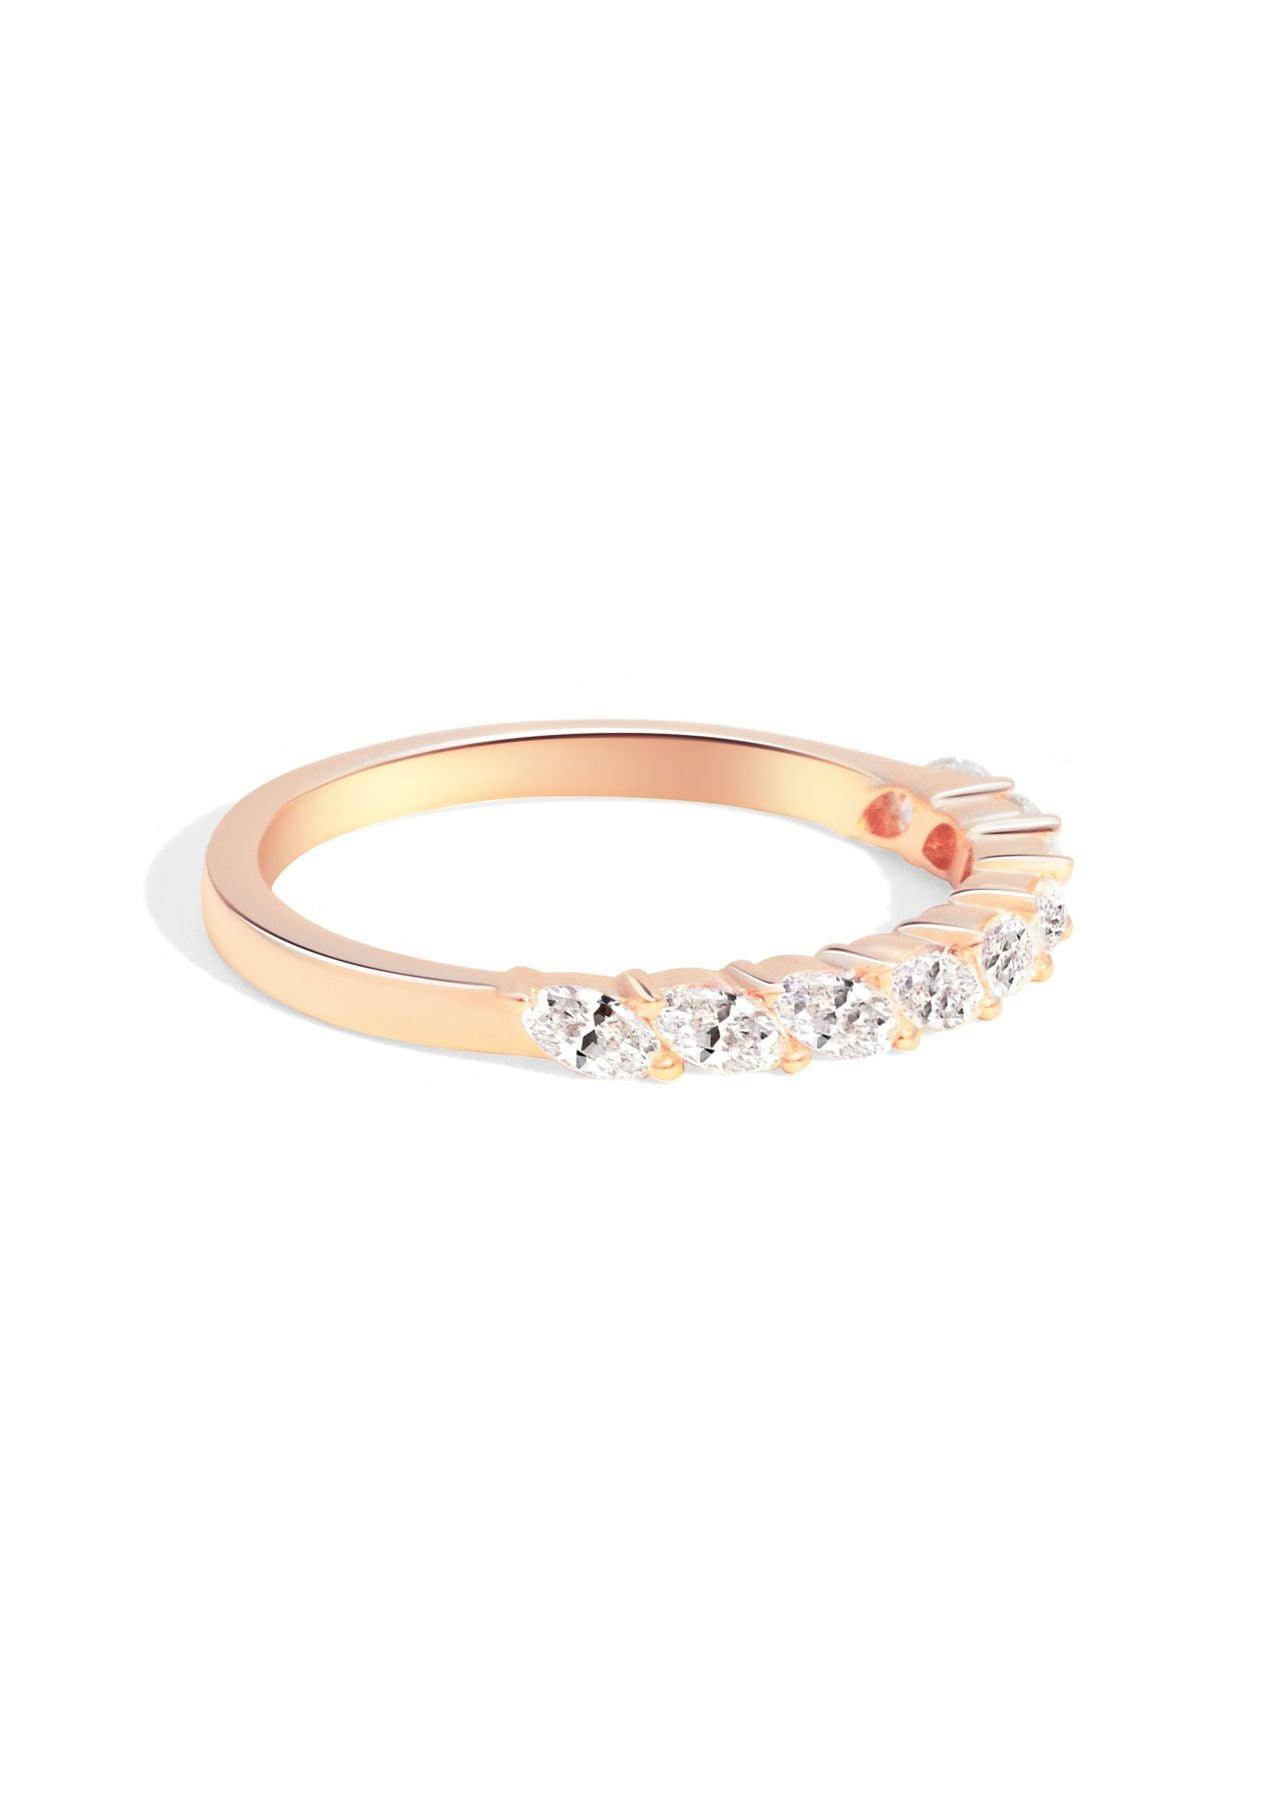 The Muse Rose Gold Diamond Band - Molten Store